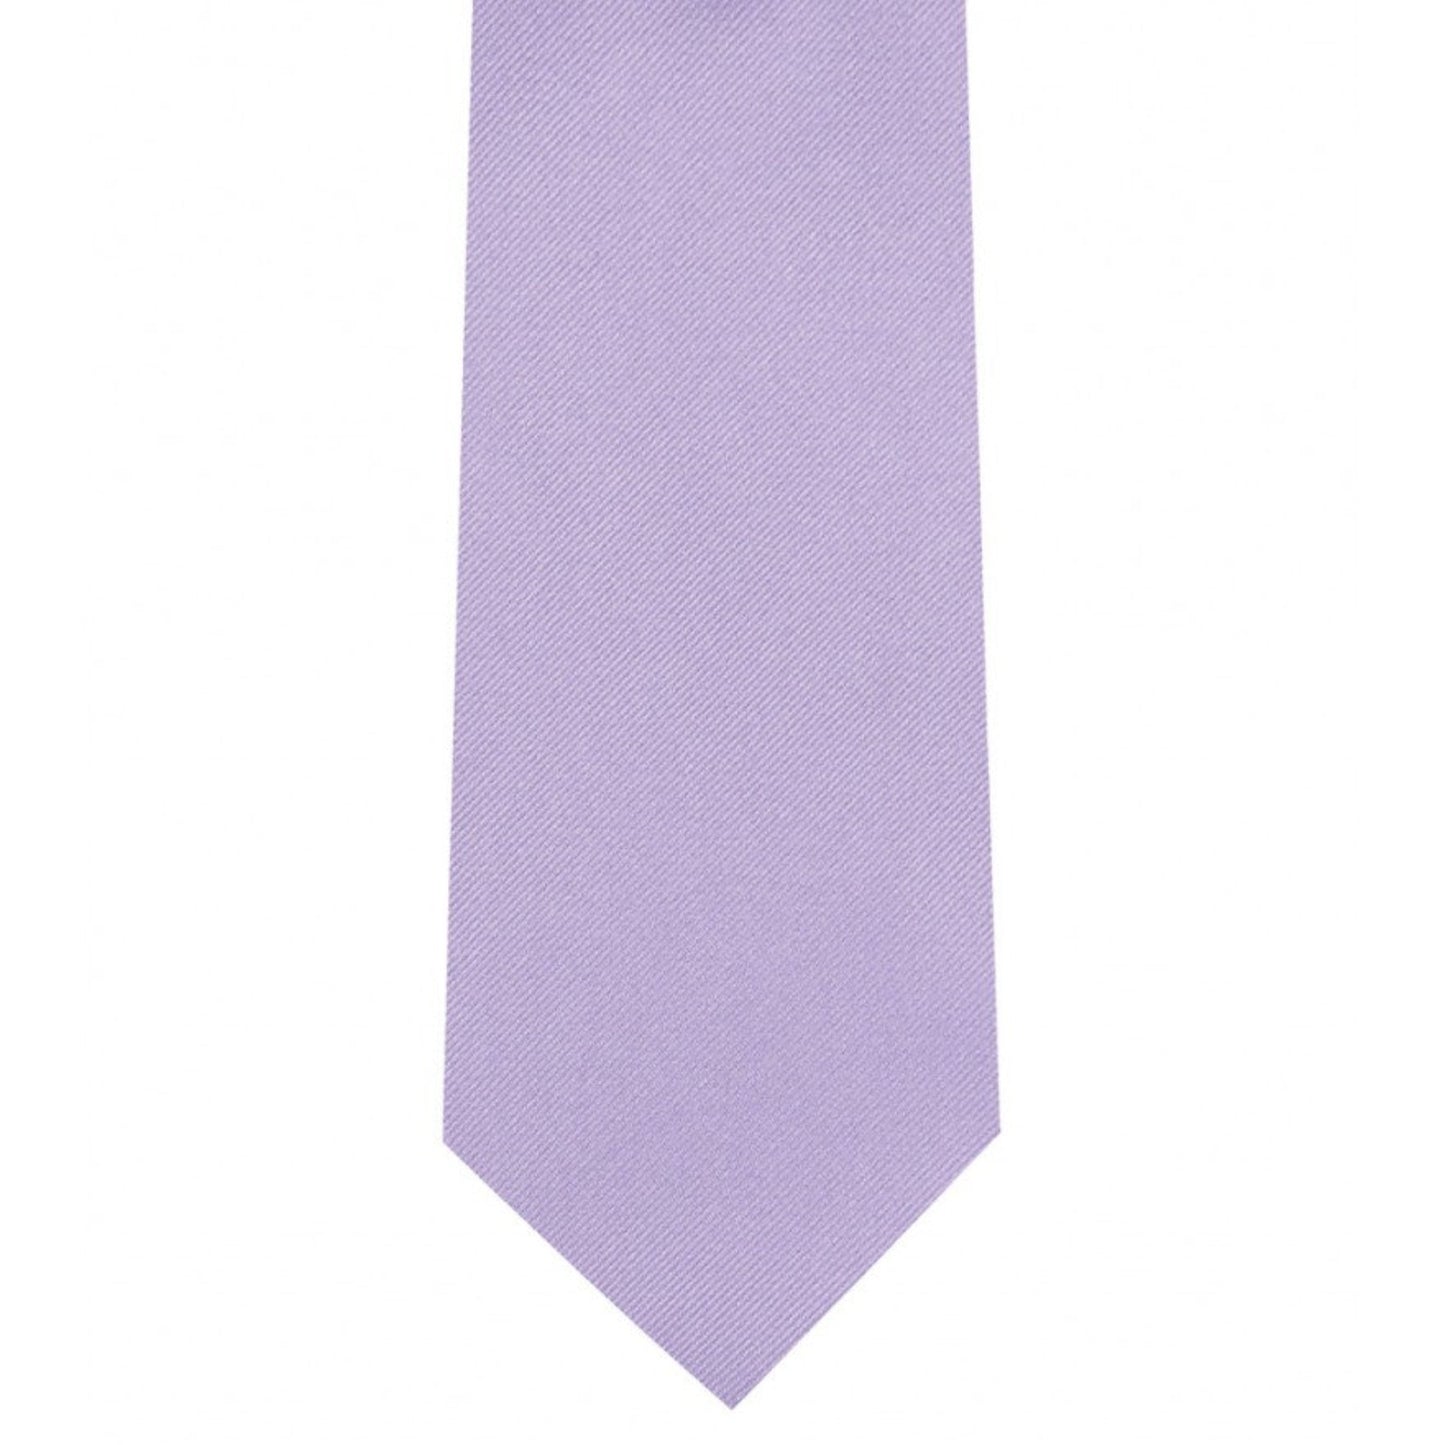 Classic Lilac Tie Ultra Skinny tie width 2.25 inches With Matching Pocket Square | KCT Menswear